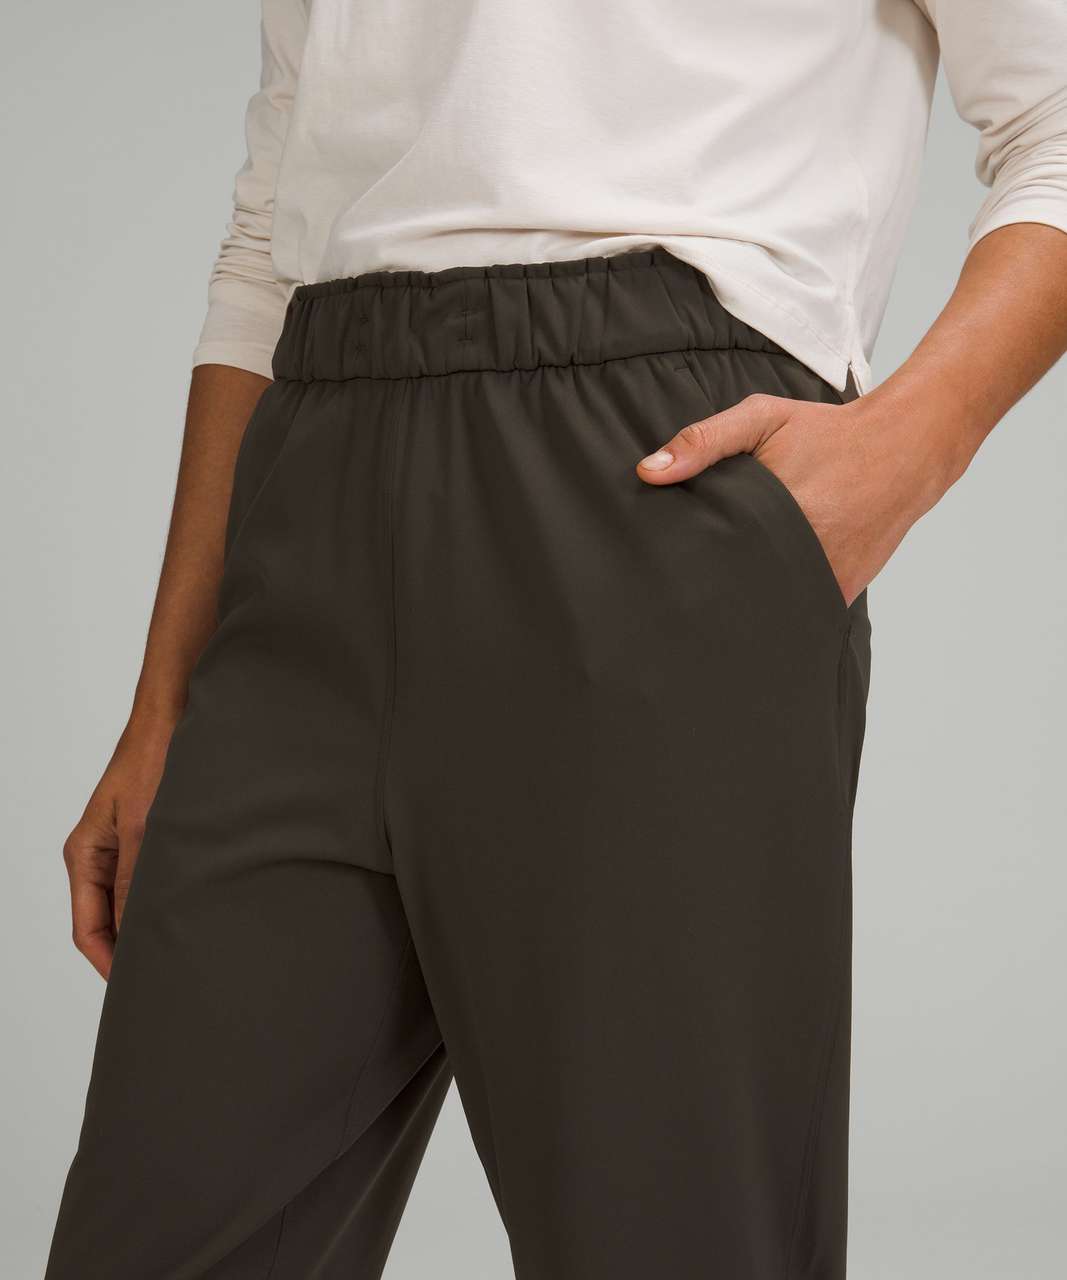 Lululemon Here to There High-Rise 7/8 Pant - Dark Olive / Dark